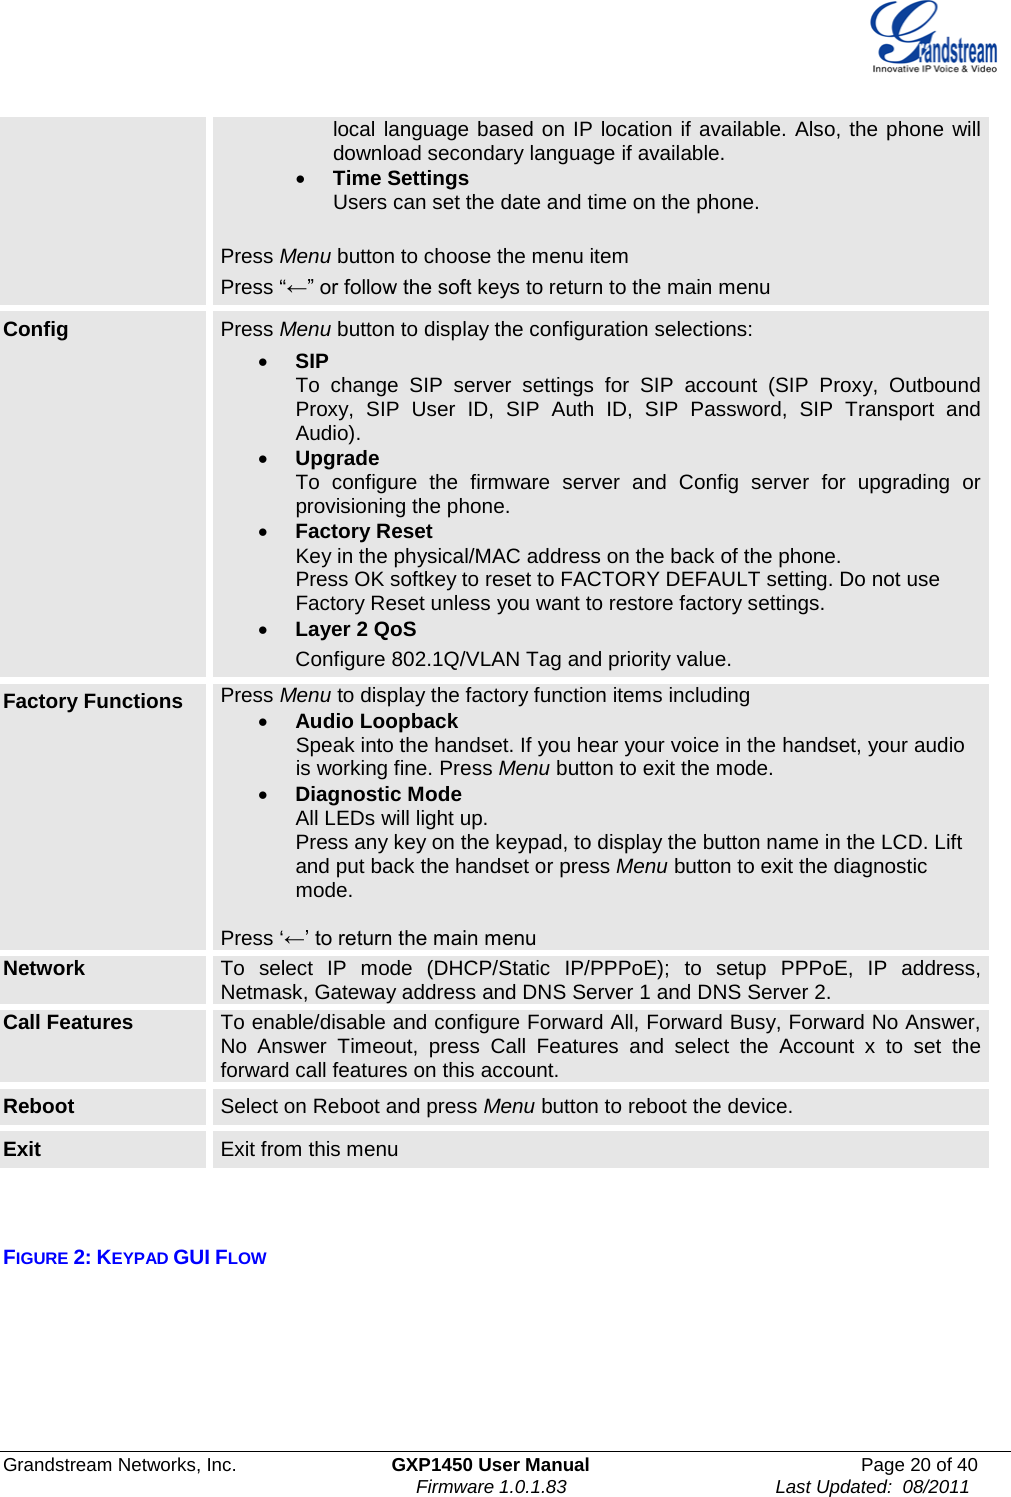  Grandstream Networks, Inc. GXP1450 User Manual Page 20 of 40                                                                         Firmware 1.0.1.83                                        Last Updated:  08/2011  local language based on IP location if available. Also, the phone will download secondary language if available. • Time Settings Users can set the date and time on the phone.  Press Menu button to choose the menu item Press “←” or follow the soft keys to return to the main menu Config Press Menu button to display the configuration selections: • SIP To change SIP server settings for SIP  account (SIP Proxy, Outbound Proxy, SIP User ID, SIP Auth ID, SIP Password, SIP Transport and Audio). • Upgrade To  configure the firmware server and Config server for upgrading or provisioning the phone.  • Factory Reset Key in the physical/MAC address on the back of the phone. Press OK softkey to reset to FACTORY DEFAULT setting. Do not use Factory Reset unless you want to restore factory settings. • Layer 2 QoS              Configure 802.1Q/VLAN Tag and priority value. Factory Functions Press Menu to display the factory function items including • Audio Loopback              Speak into the handset. If you hear your voice in the handset, your audio                is working fine. Press Menu button to exit the mode. • Diagnostic Mode All LEDs will light up. Press any key on the keypad, to display the button name in the LCD. Lift and put back the handset or press Menu button to exit the diagnostic mode.  Press ‘←’ to return the main menu Network To  select IP mode (DHCP/Static IP/PPPoE); to setup PPPoE, IP address, Netmask, Gateway address and DNS Server 1 and DNS Server 2. Call Features To enable/disable and configure Forward All, Forward Busy, Forward No Answer, No Answer Timeout, press Call Features and select the Account x to set the forward call features on this account. Reboot Select on Reboot and press Menu button to reboot the device. Exit Exit from this menu    FIGURE 2: KEYPAD GUI FLOW        